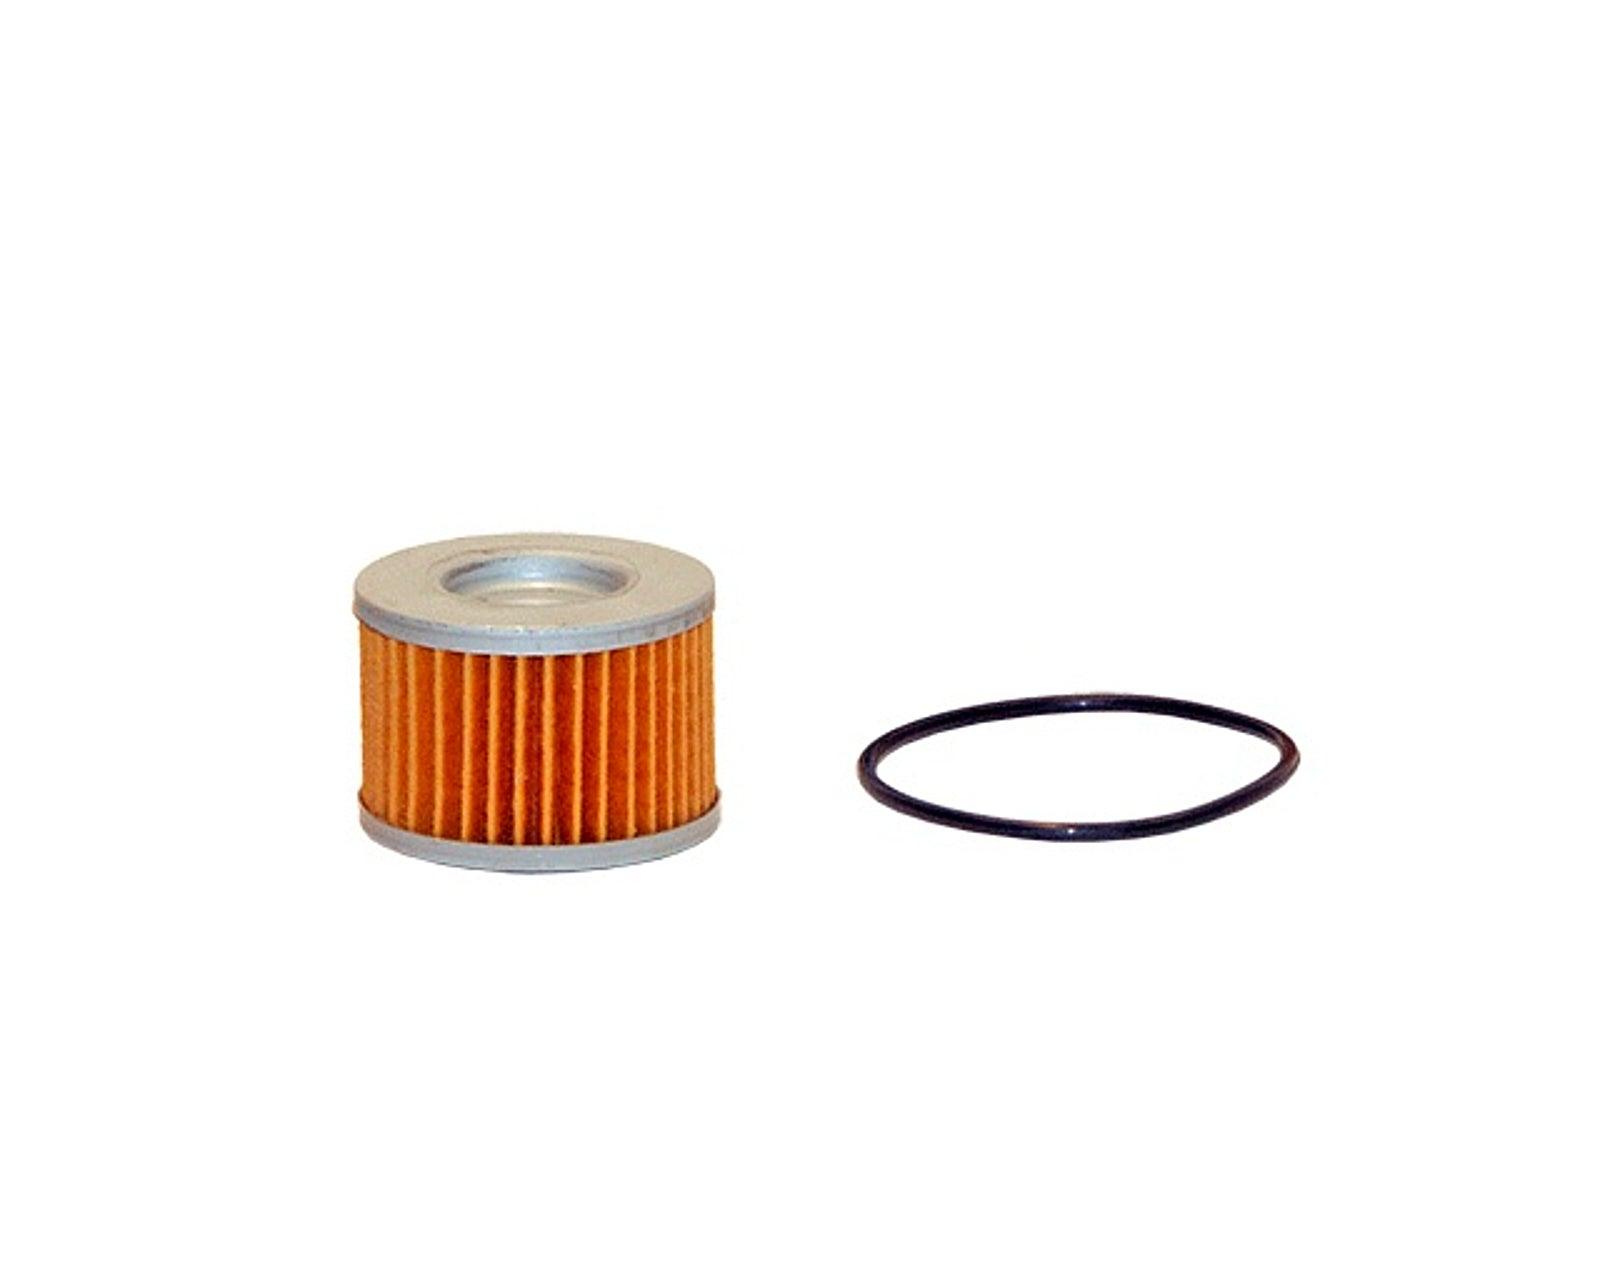 Metal Canister Filter - Burlile Performance Products